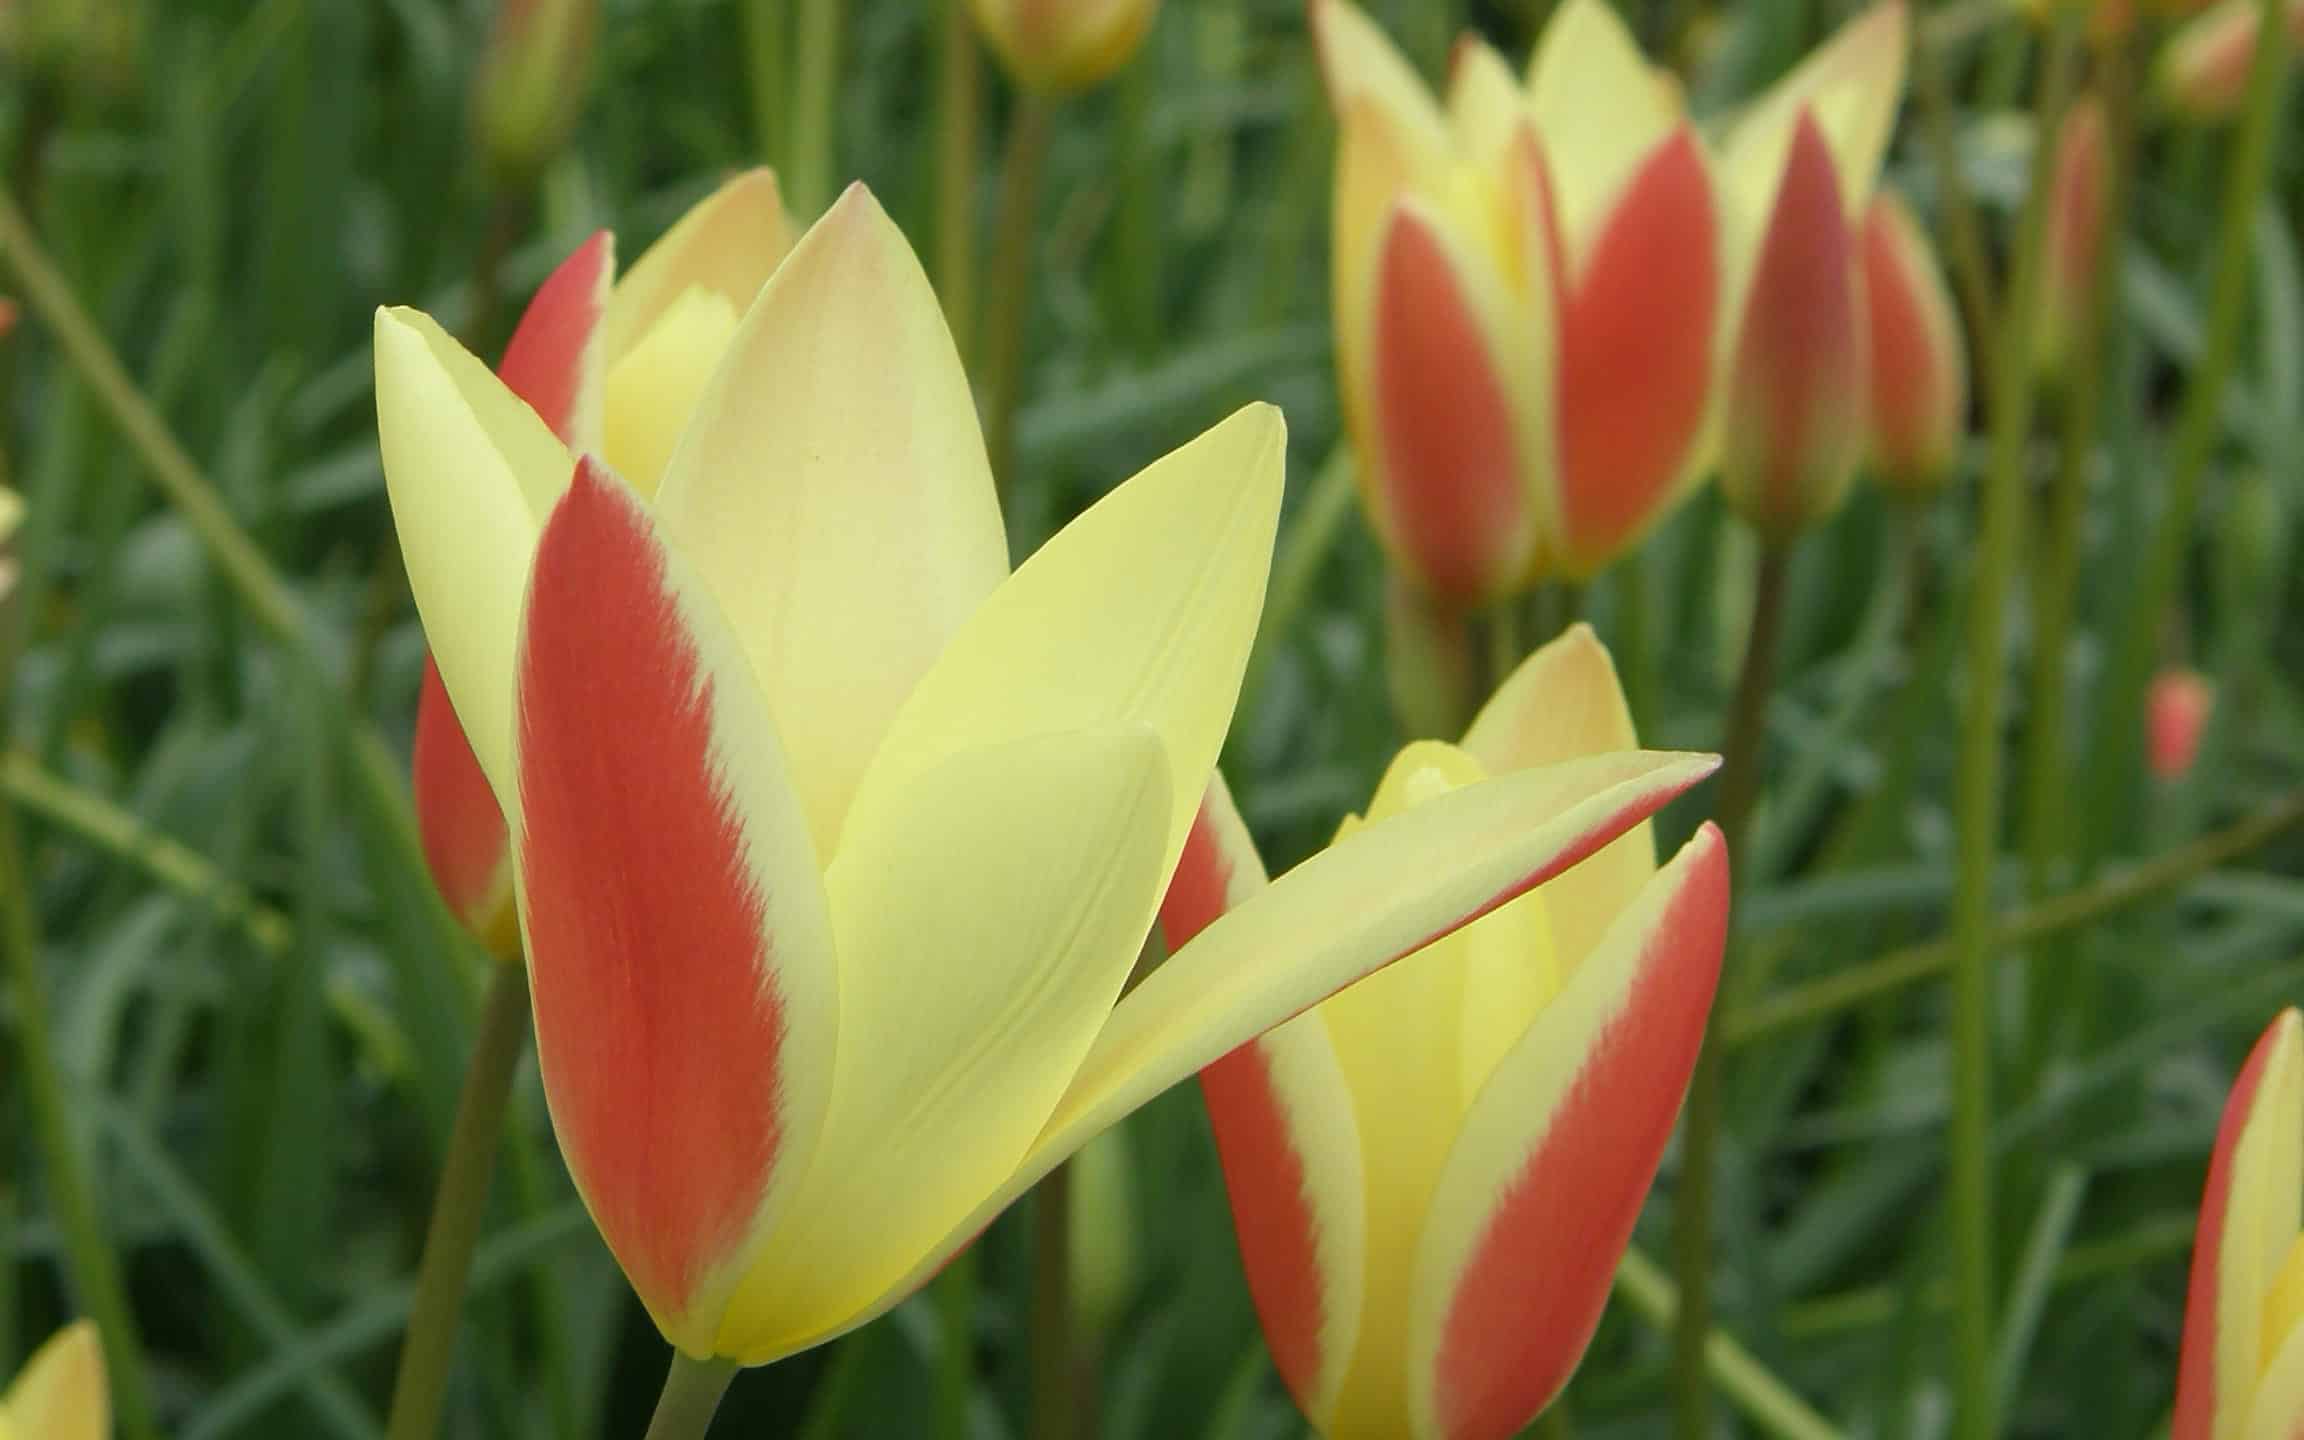 Yellow and red lady tulips in a garden